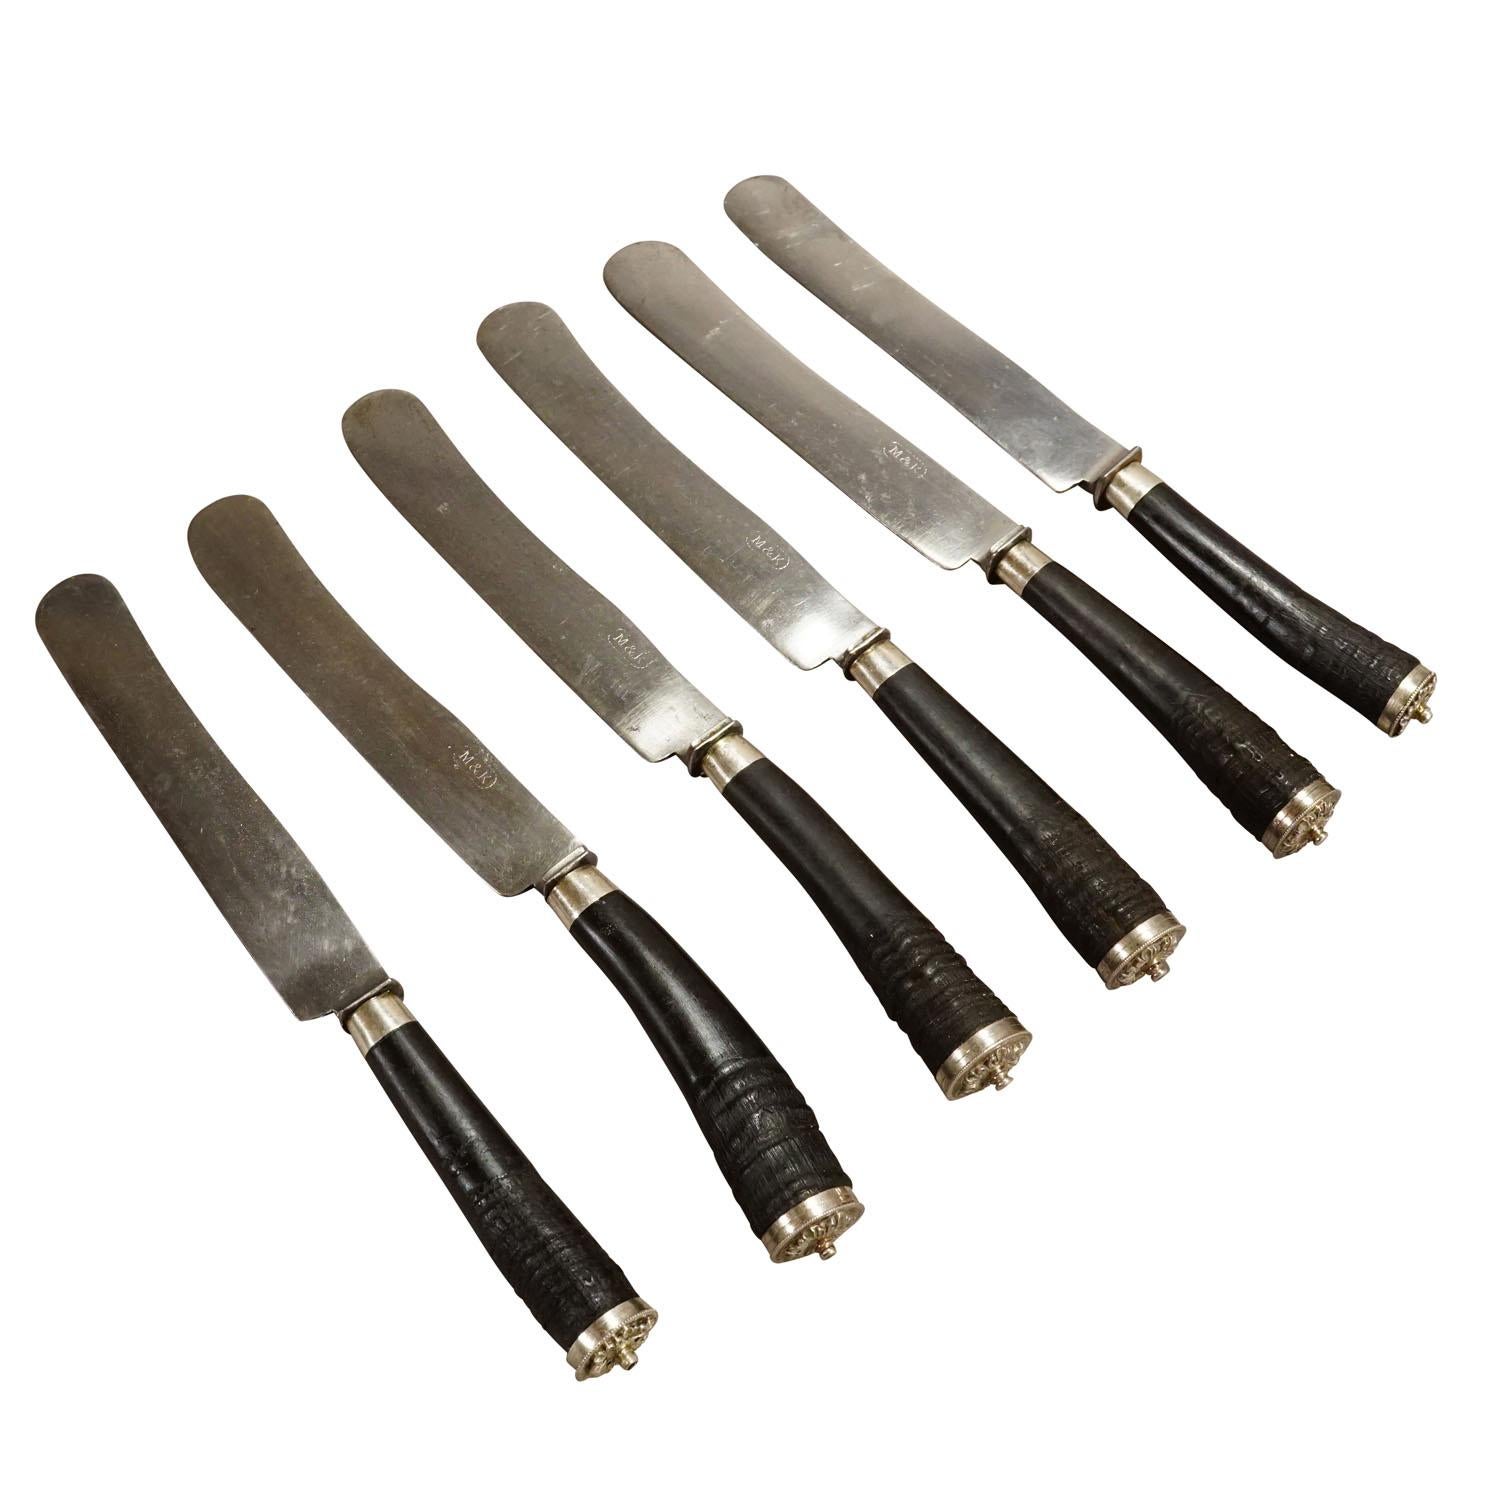 Antique Set of Rustic hunters knives with Chamois Horn handles

A rare antique set of six knives. The handles are made of genuine chamois horn and feature a decorated silver knob on their ends. The blades are made of galvanized metal. Manufactured